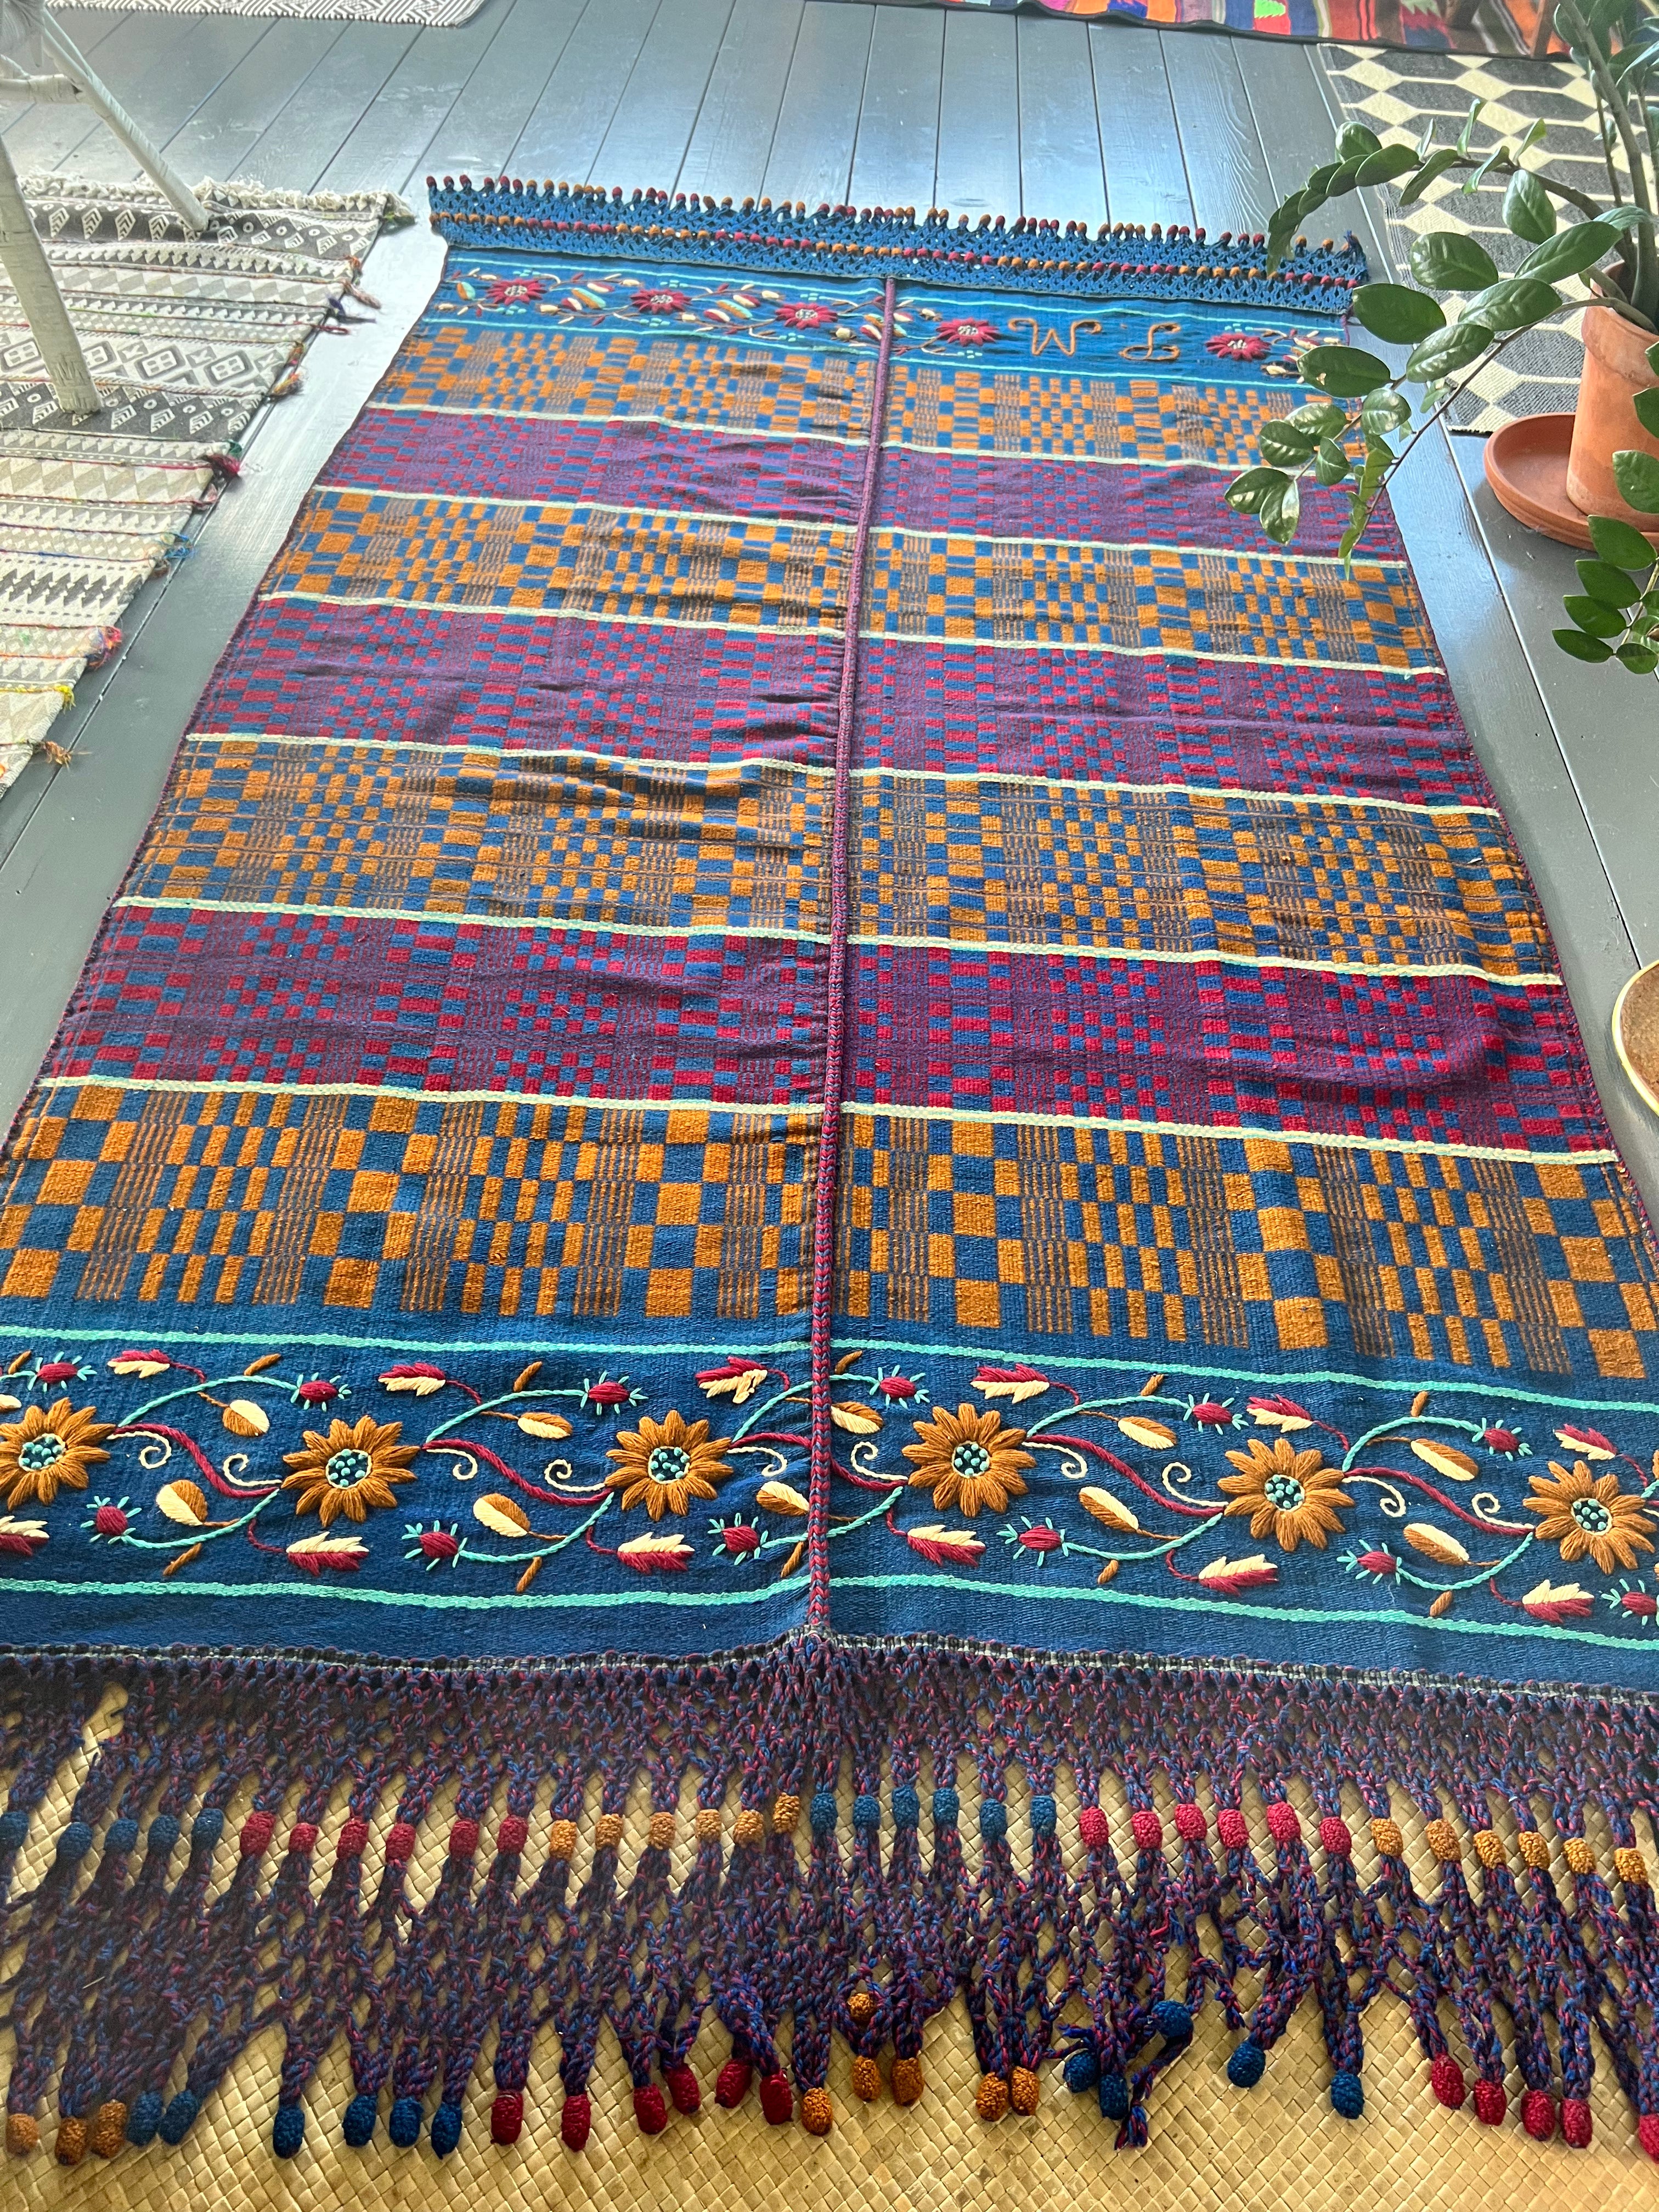 AUTHENTIC HAND-KNOTTED |Vintage Embroidered |Pictorial Wool Kilim Area| 7’ x 4’ - Honorooroo Lifestyle